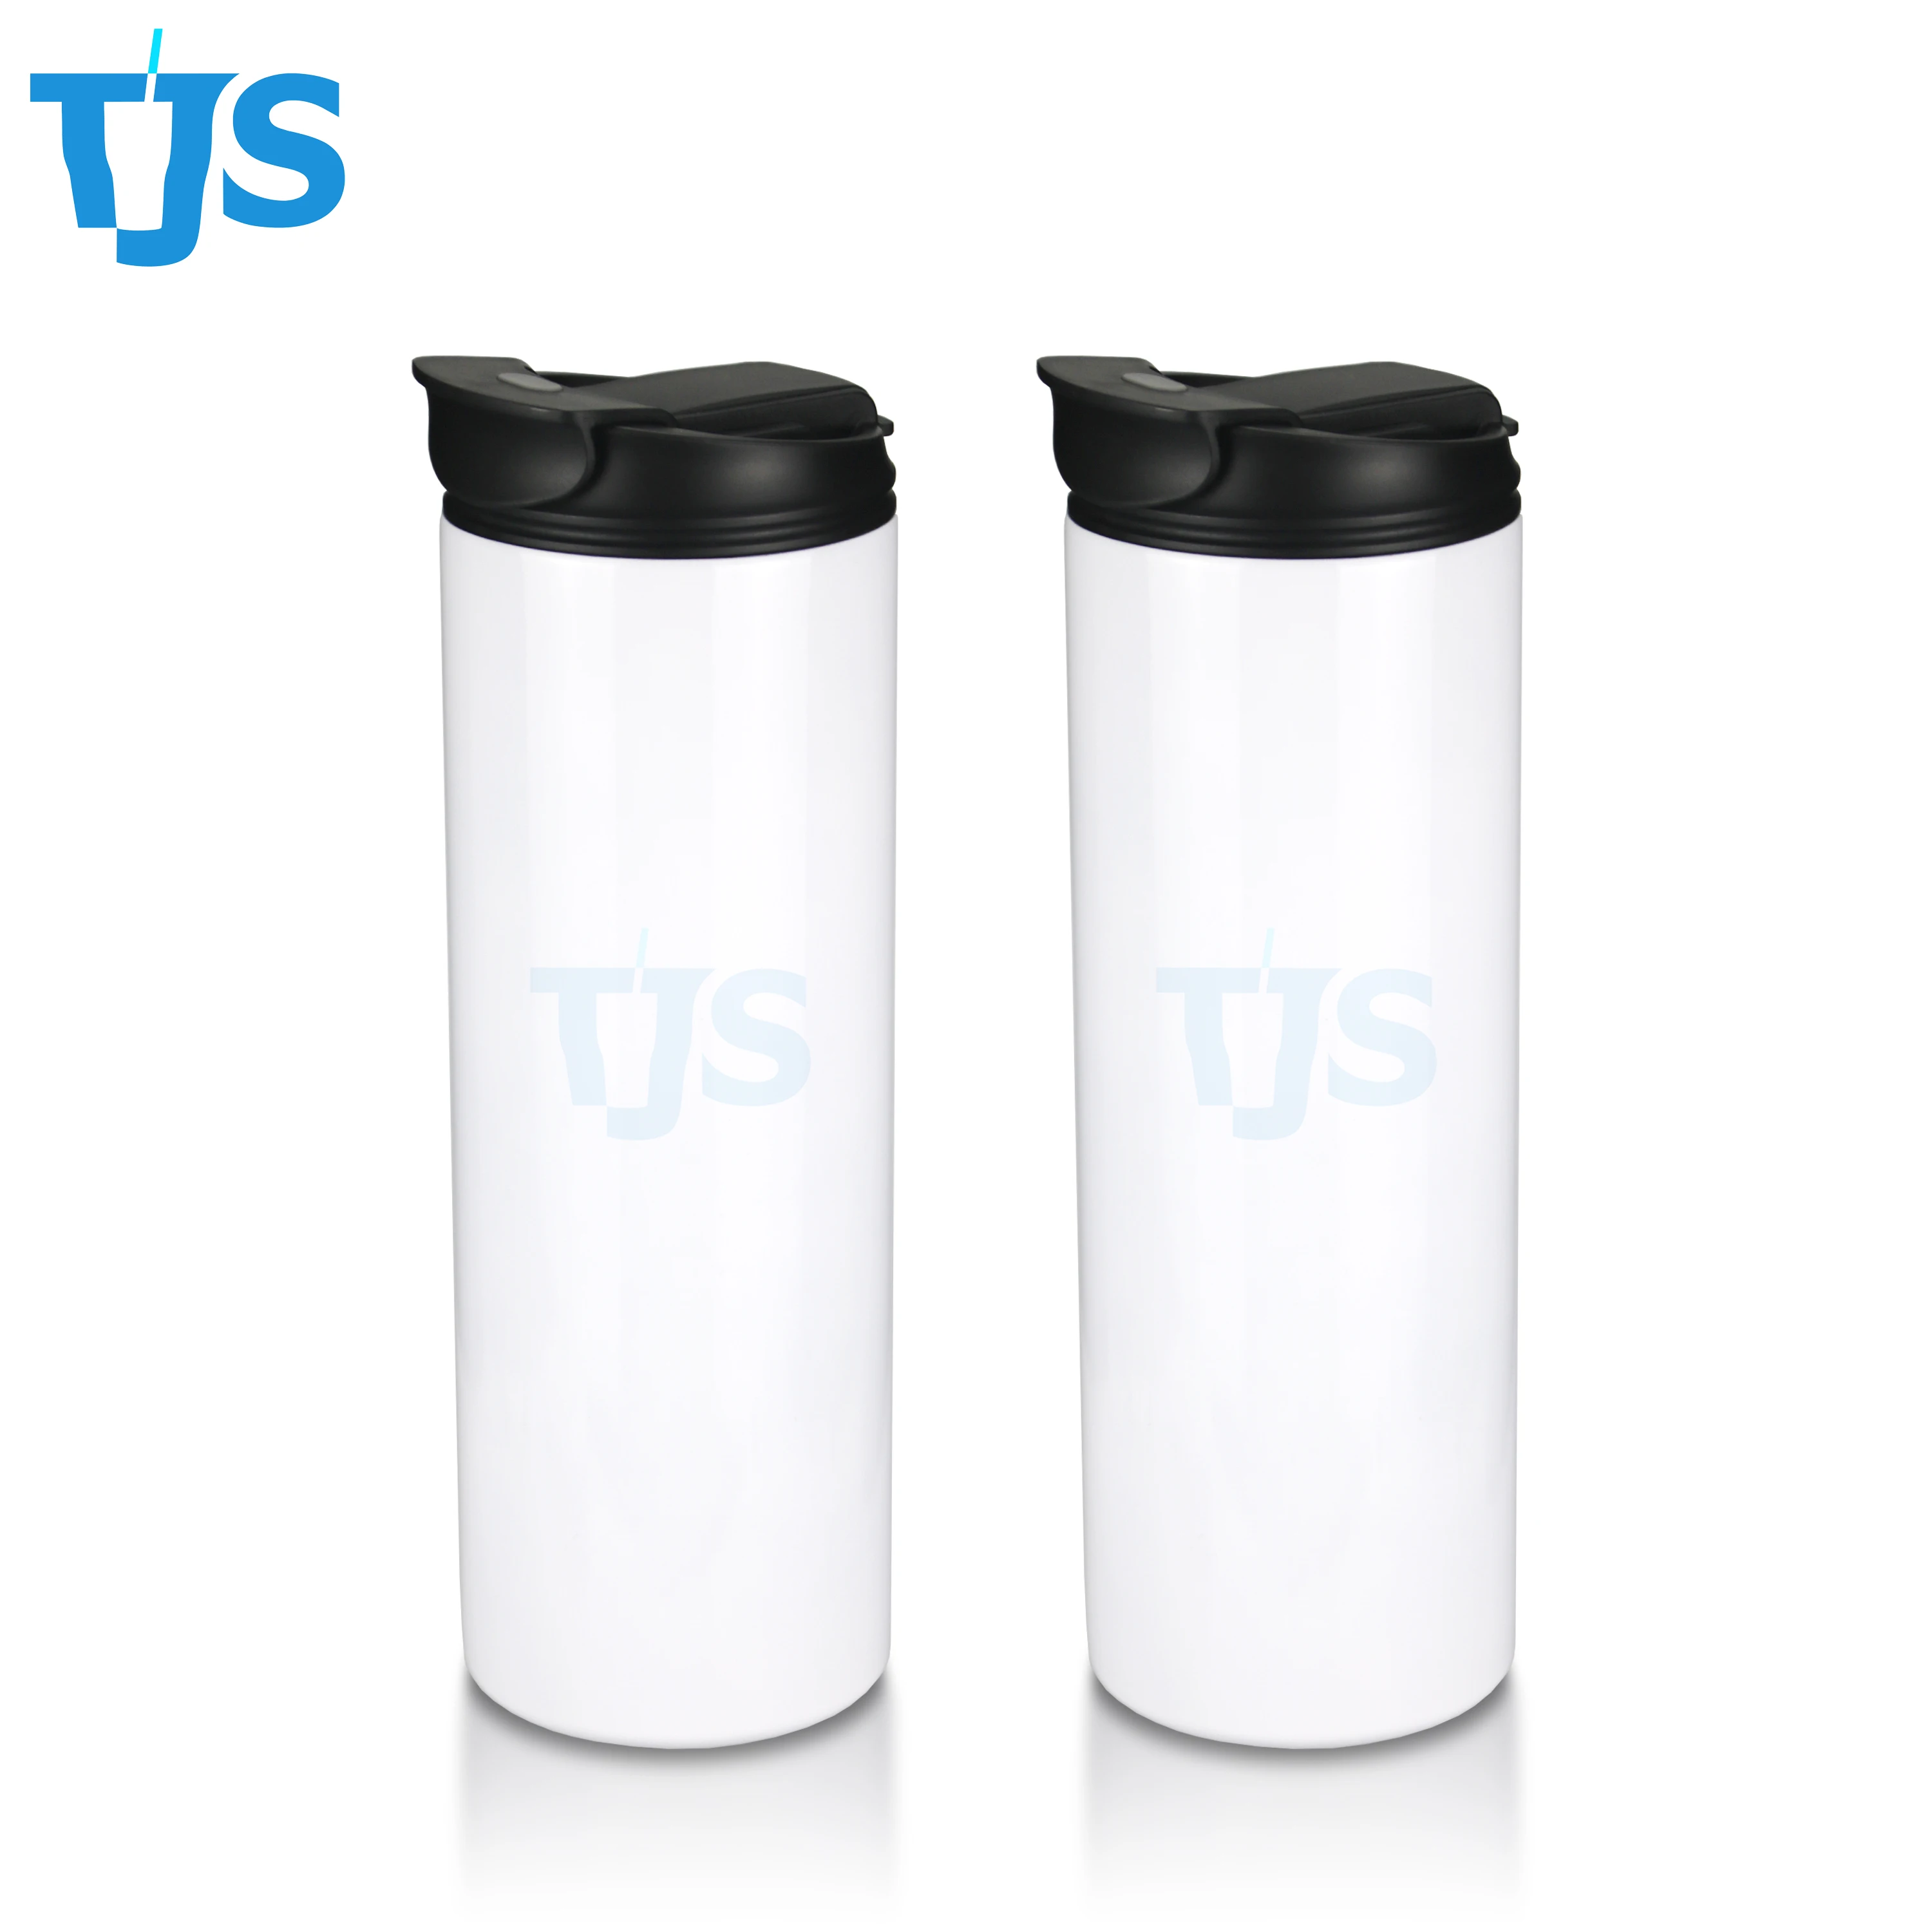 

Sublimation Blanks Straight Skinny Tumbler 20 oz Stainless Steel Double Wall Insulated Water Tumbler Cup with Lid and Straw, White